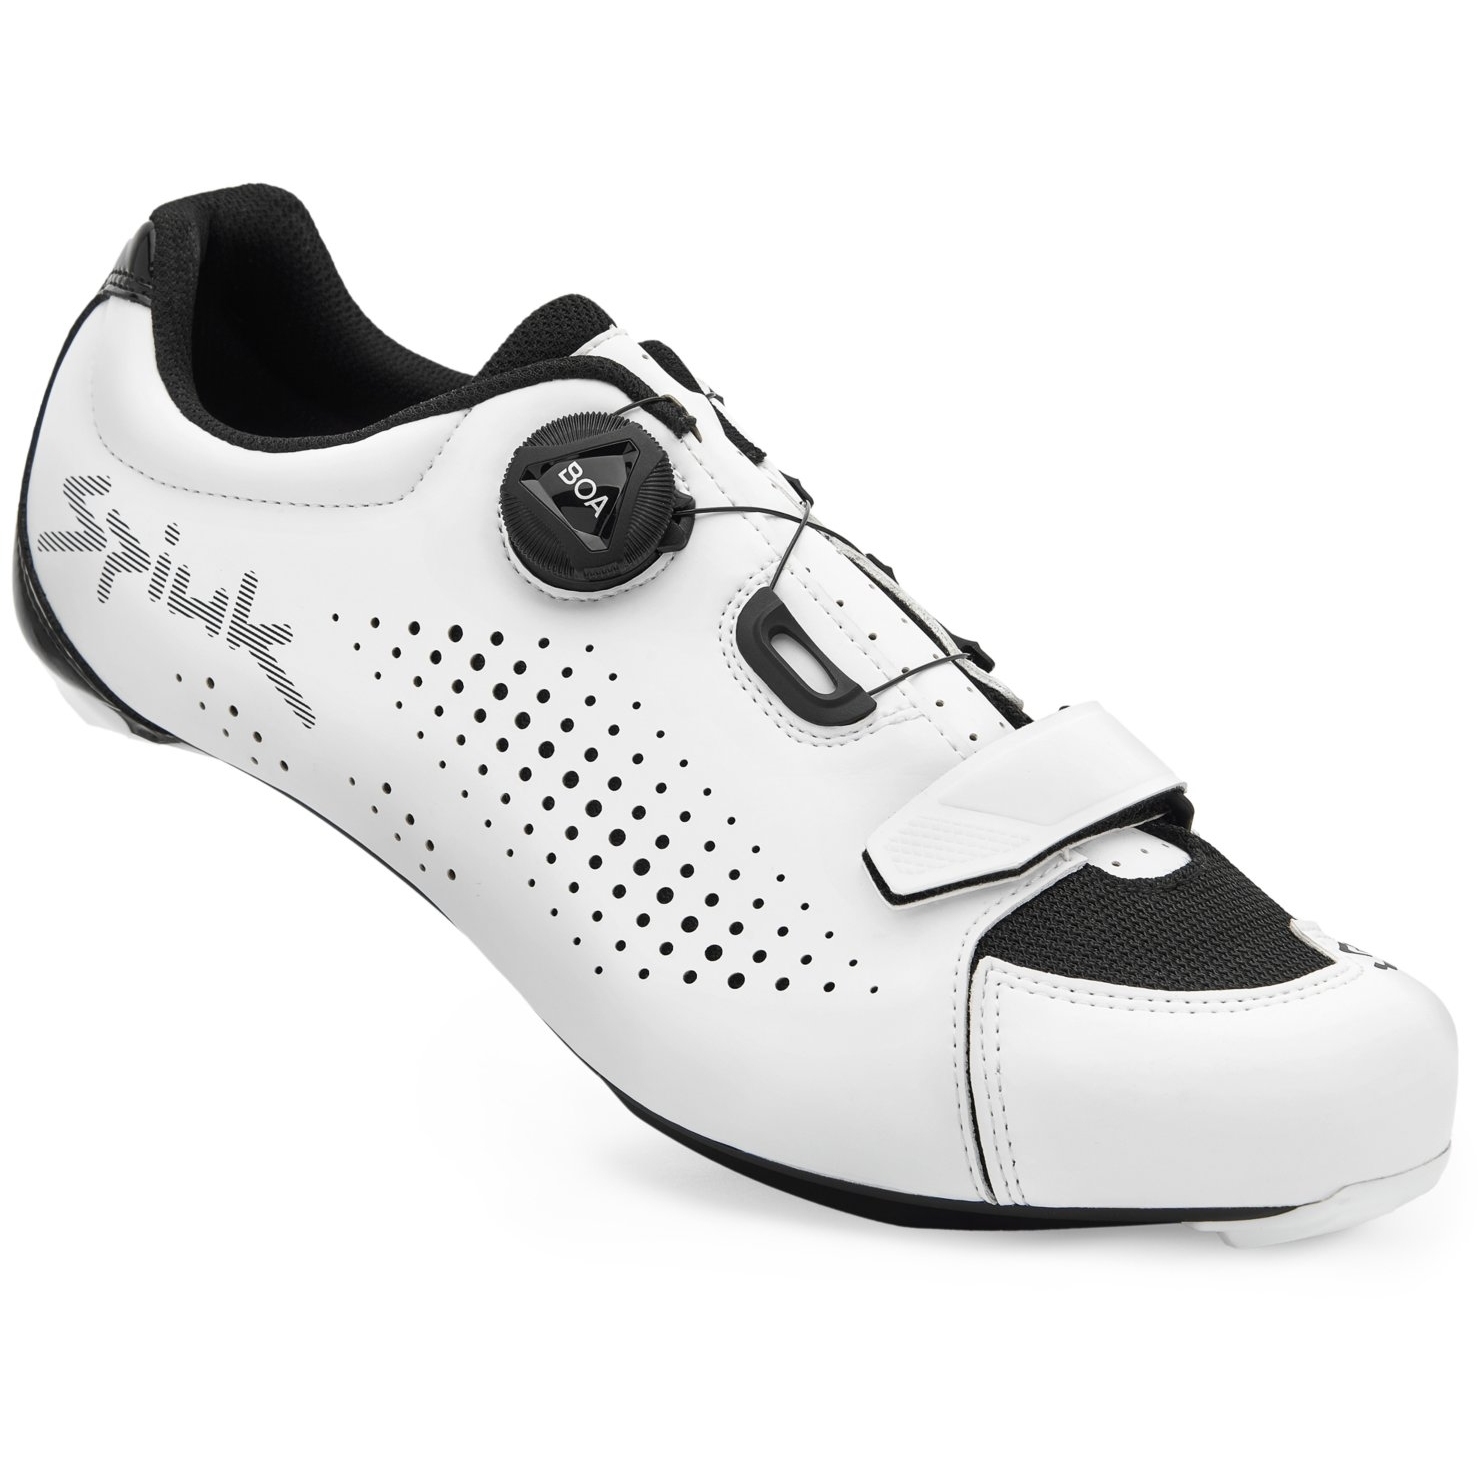 Picture of Spiuk Caray Road Shoe - white